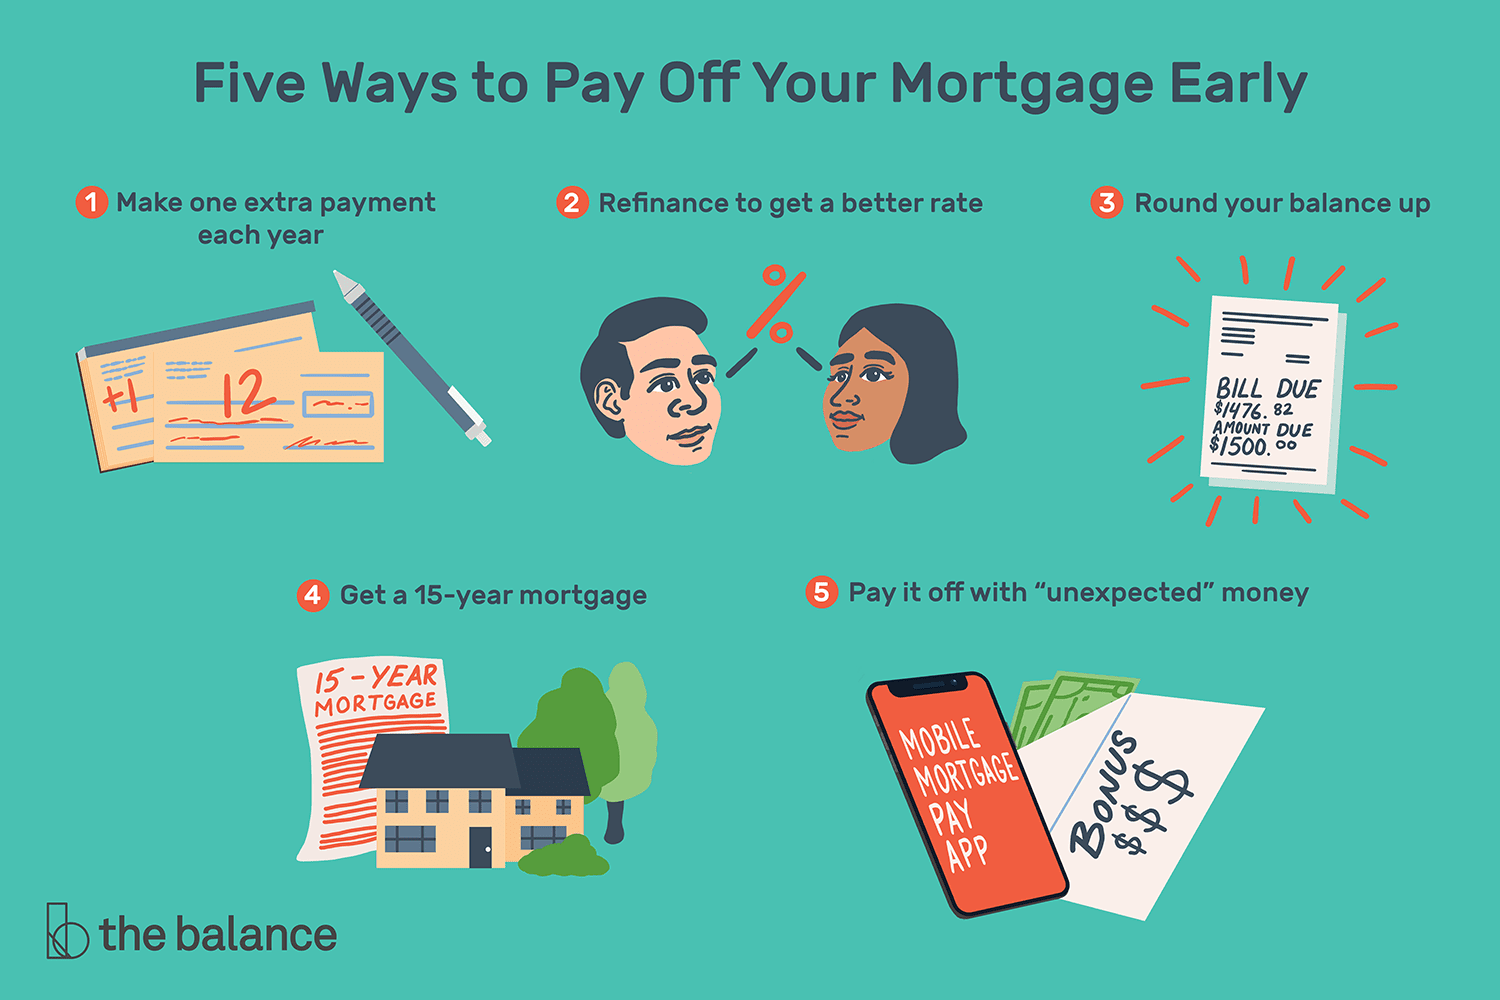 How to Pay Off Your Mortgage Early